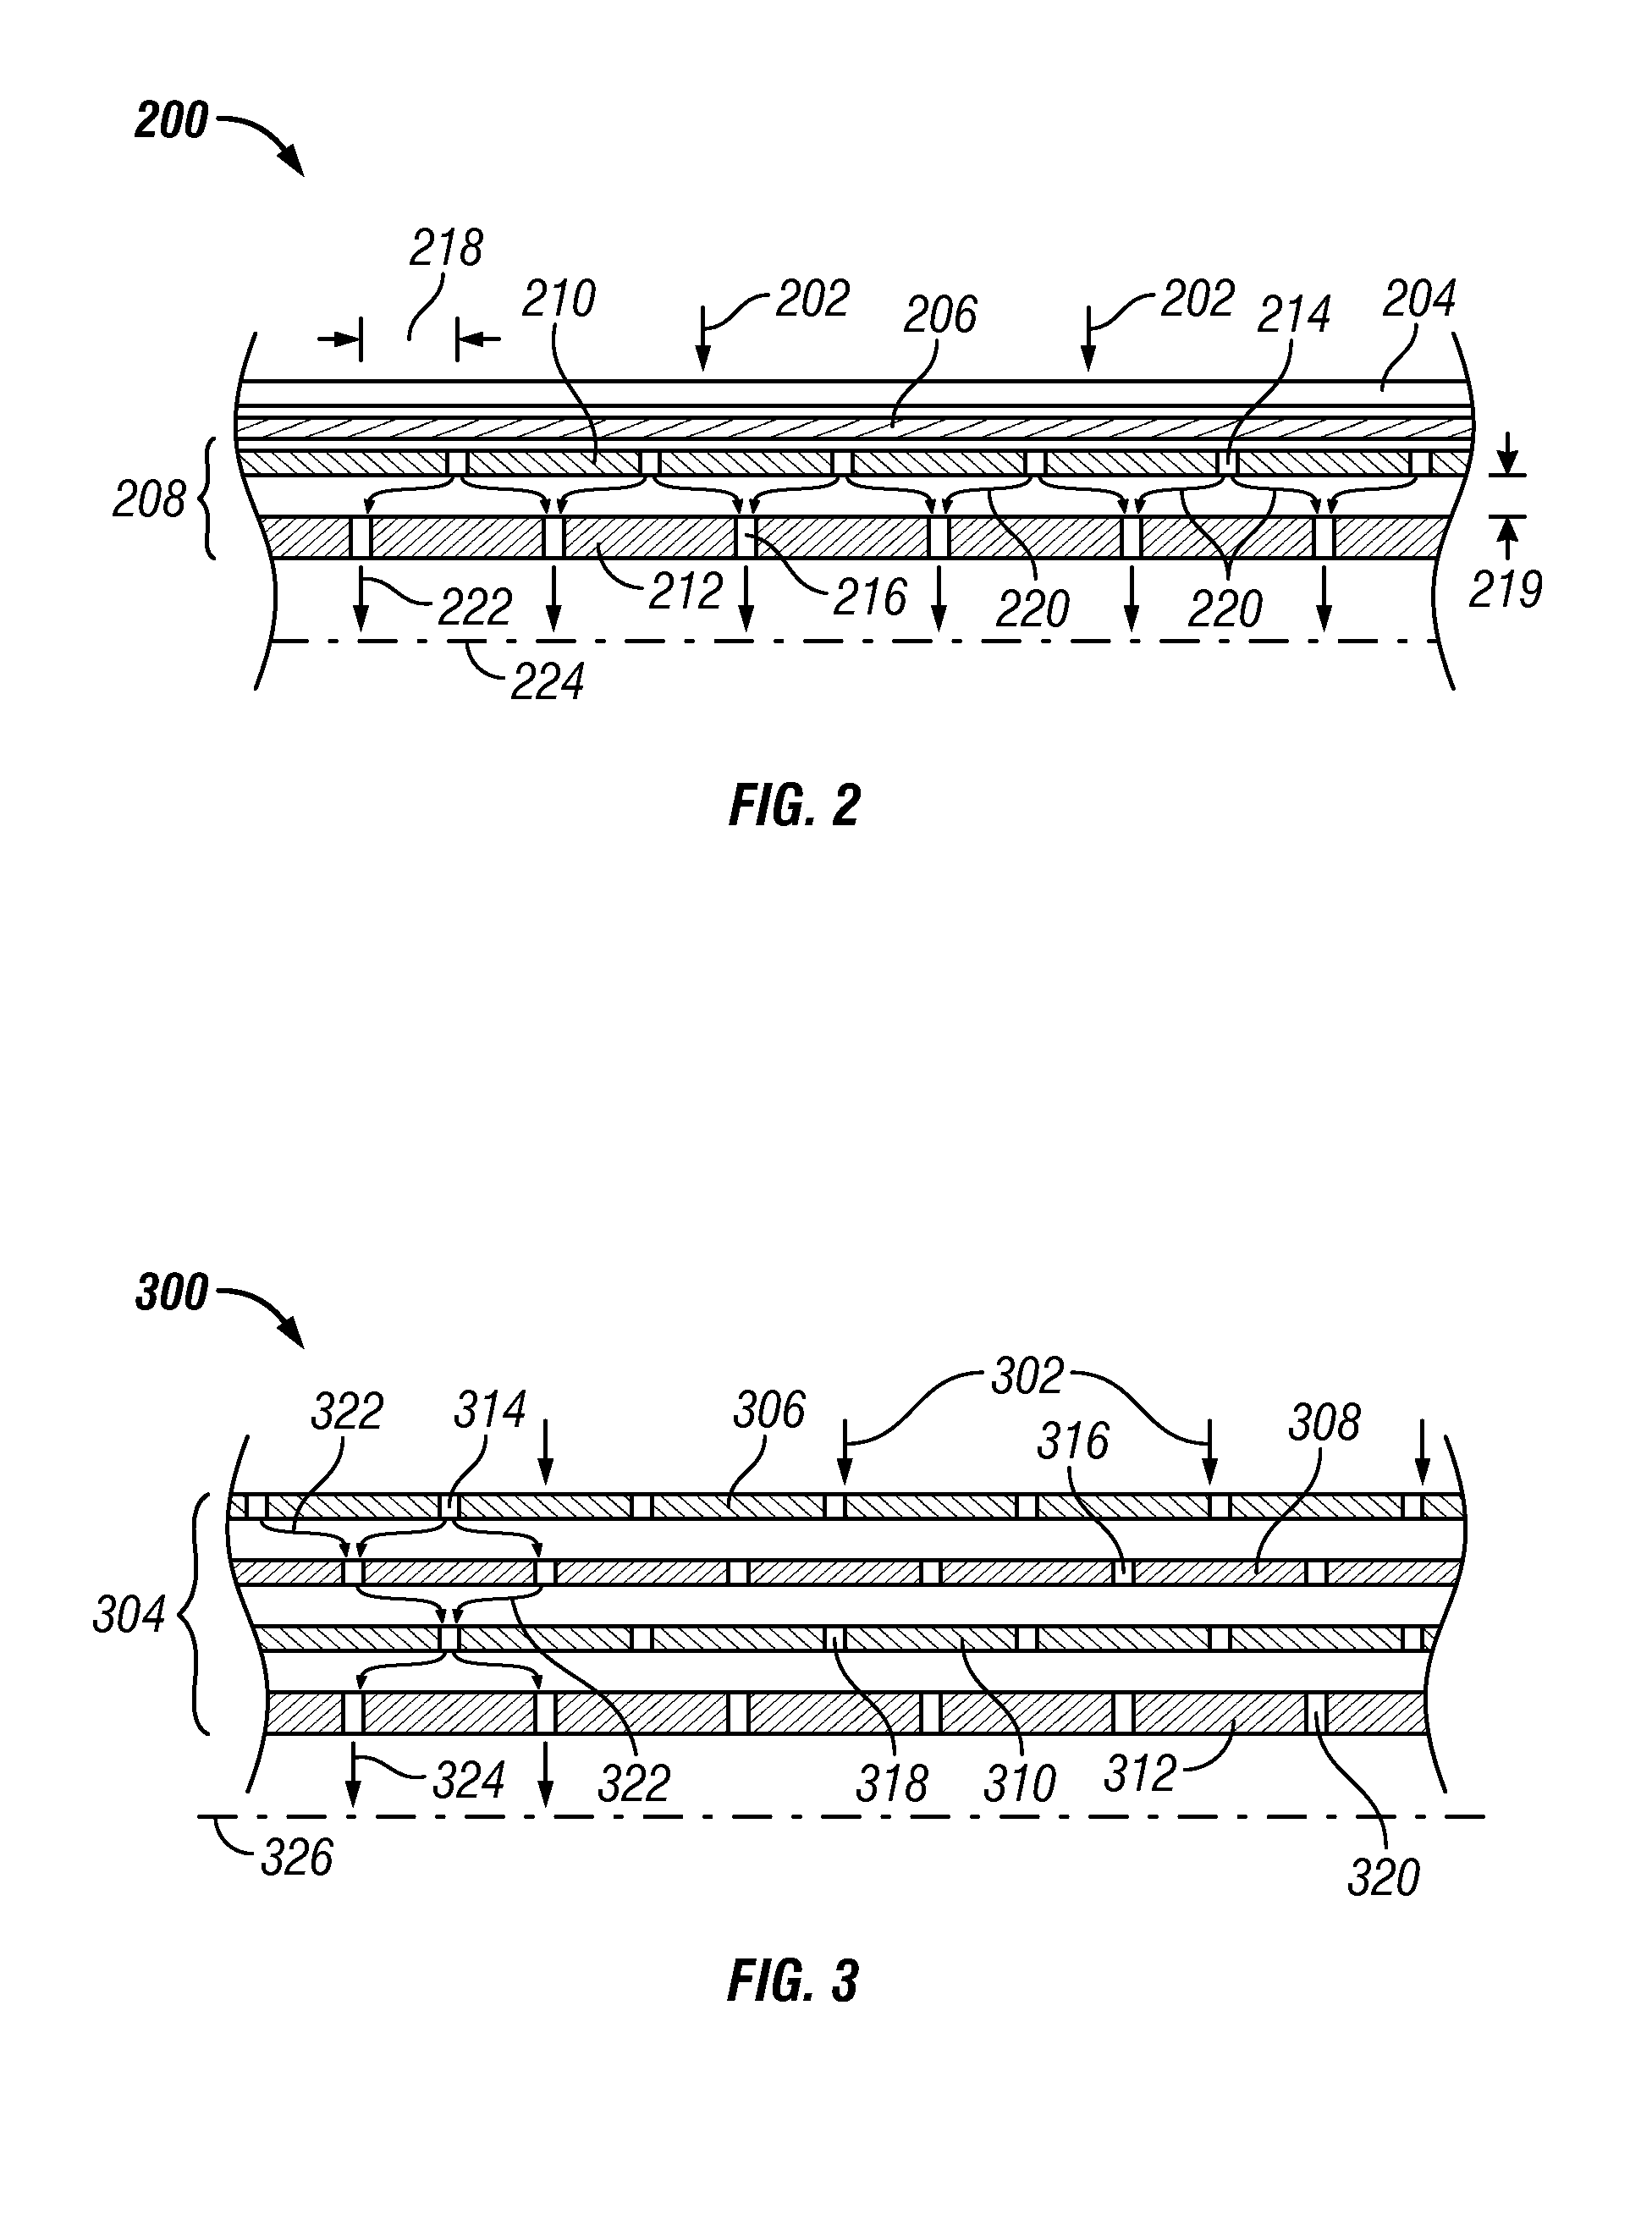 Apparatus and method for controlling fluid flow between formations and wellbores